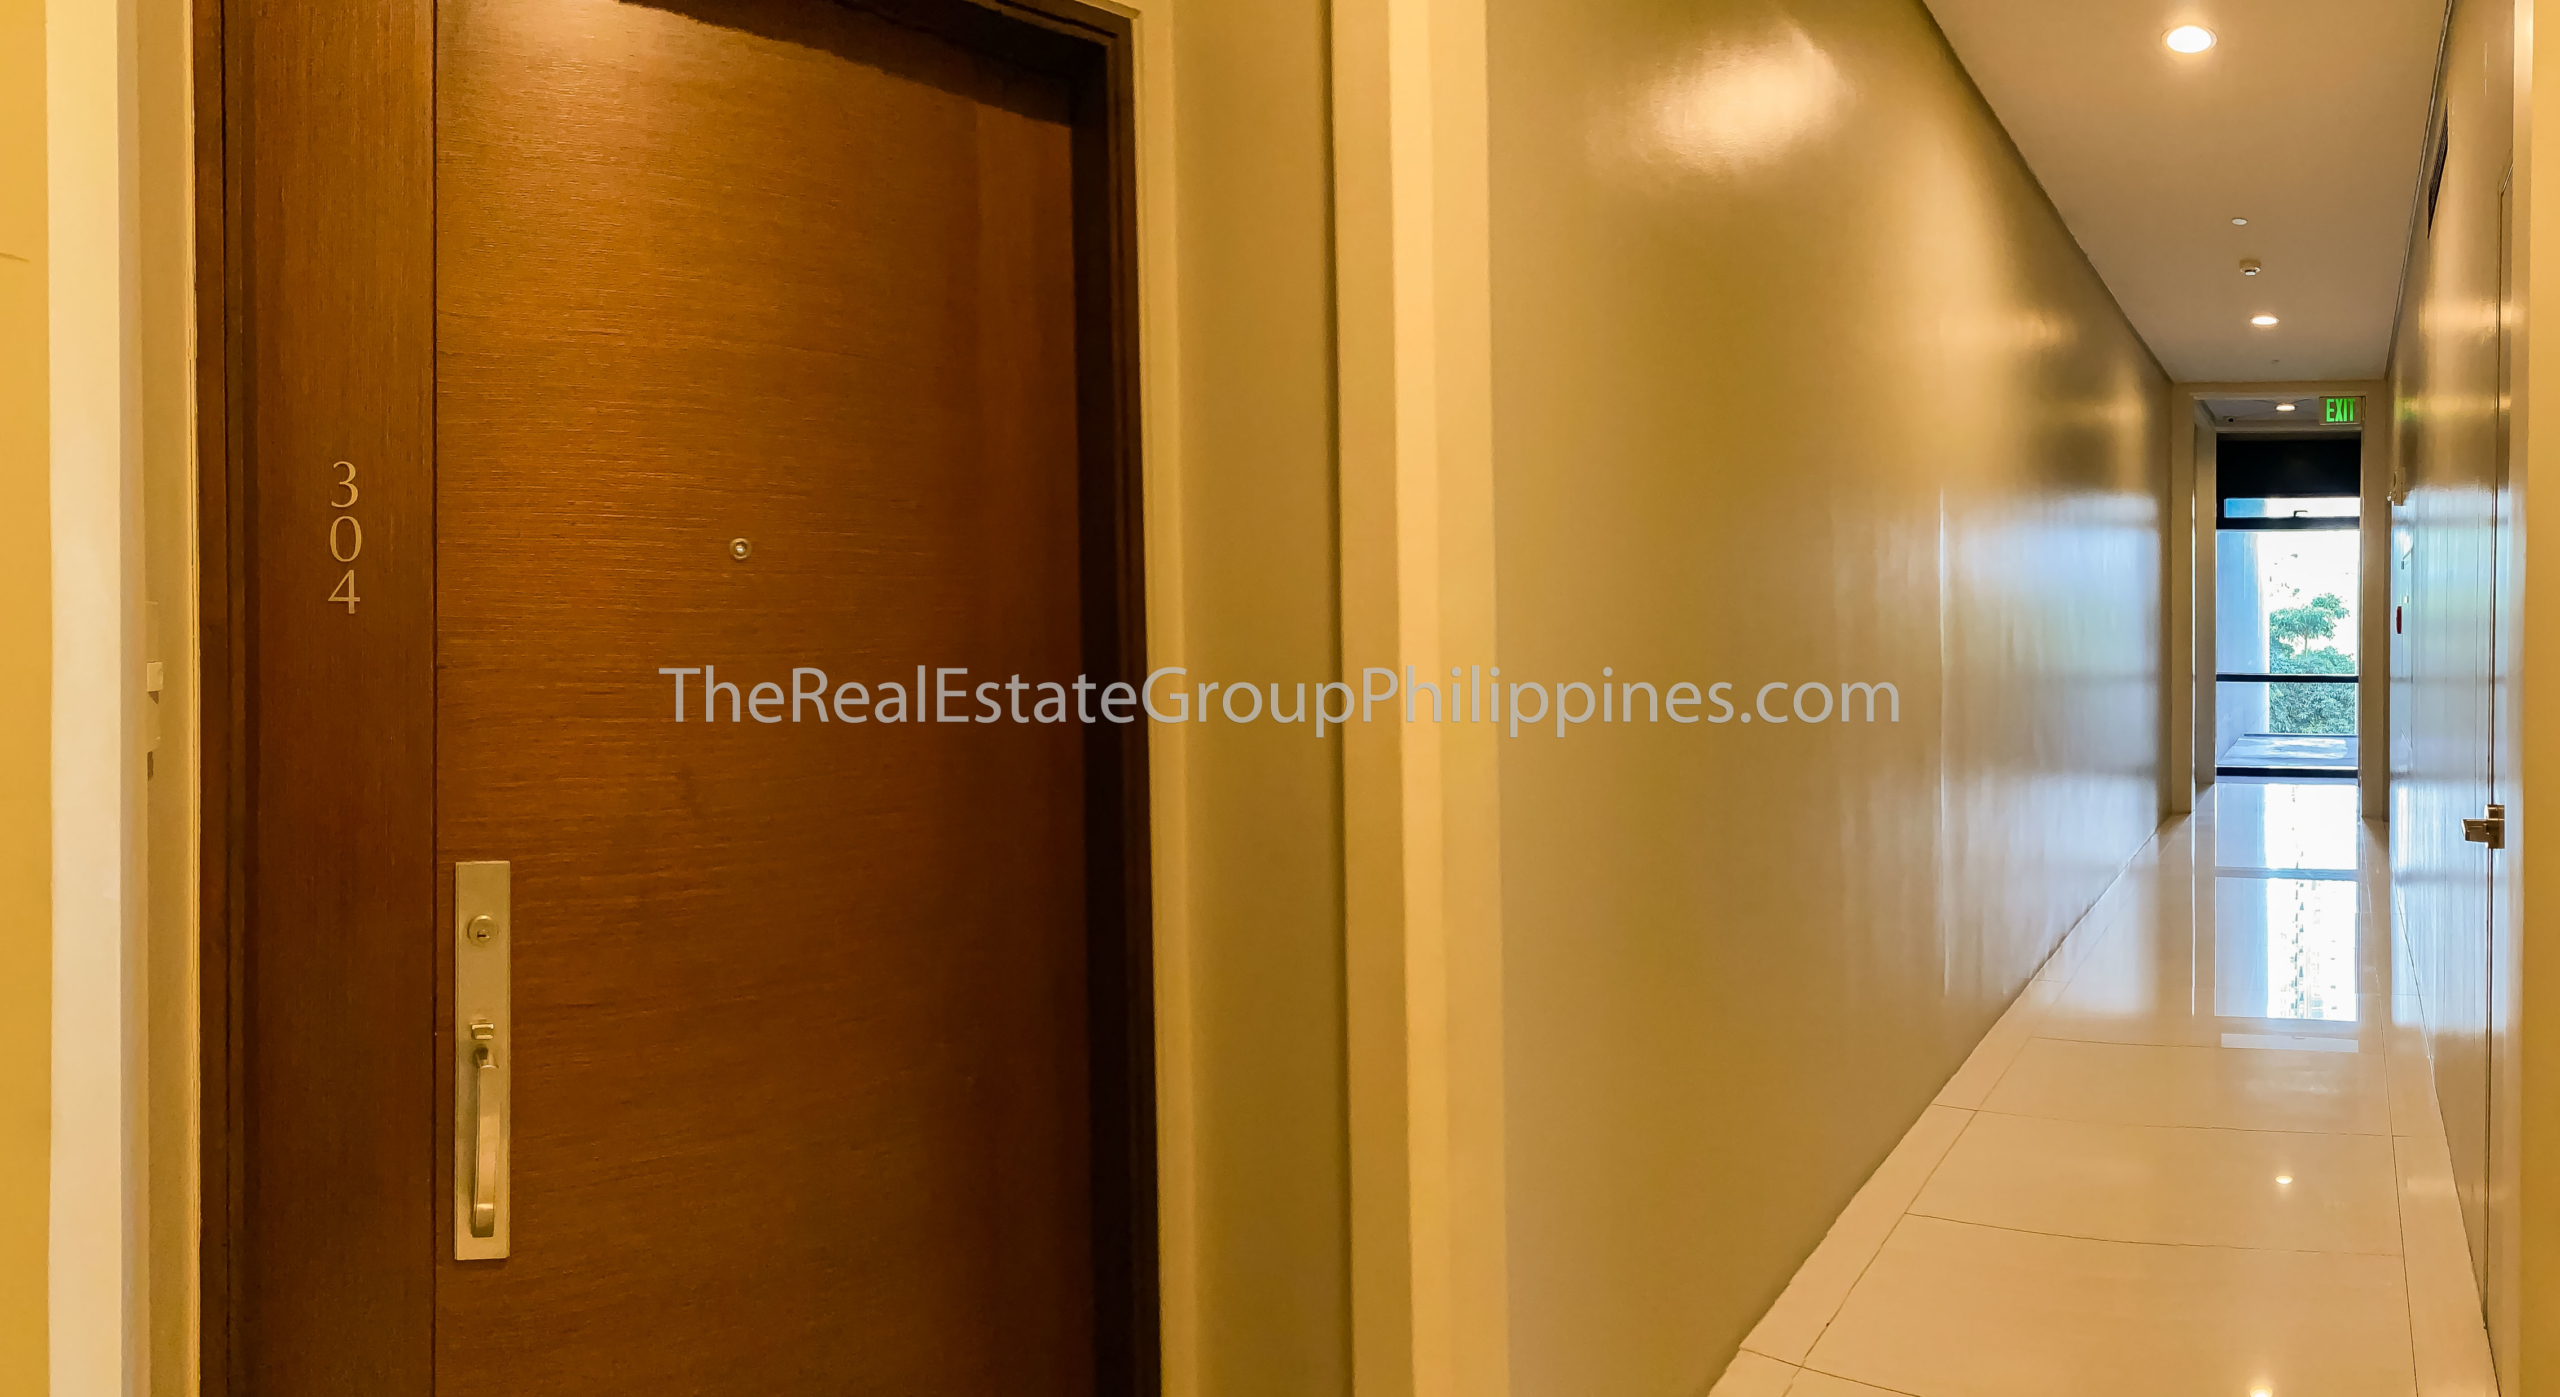 1BR Condo For Rent, Arya Residences, Tower 1, BGC - ₱75K Per Month-4